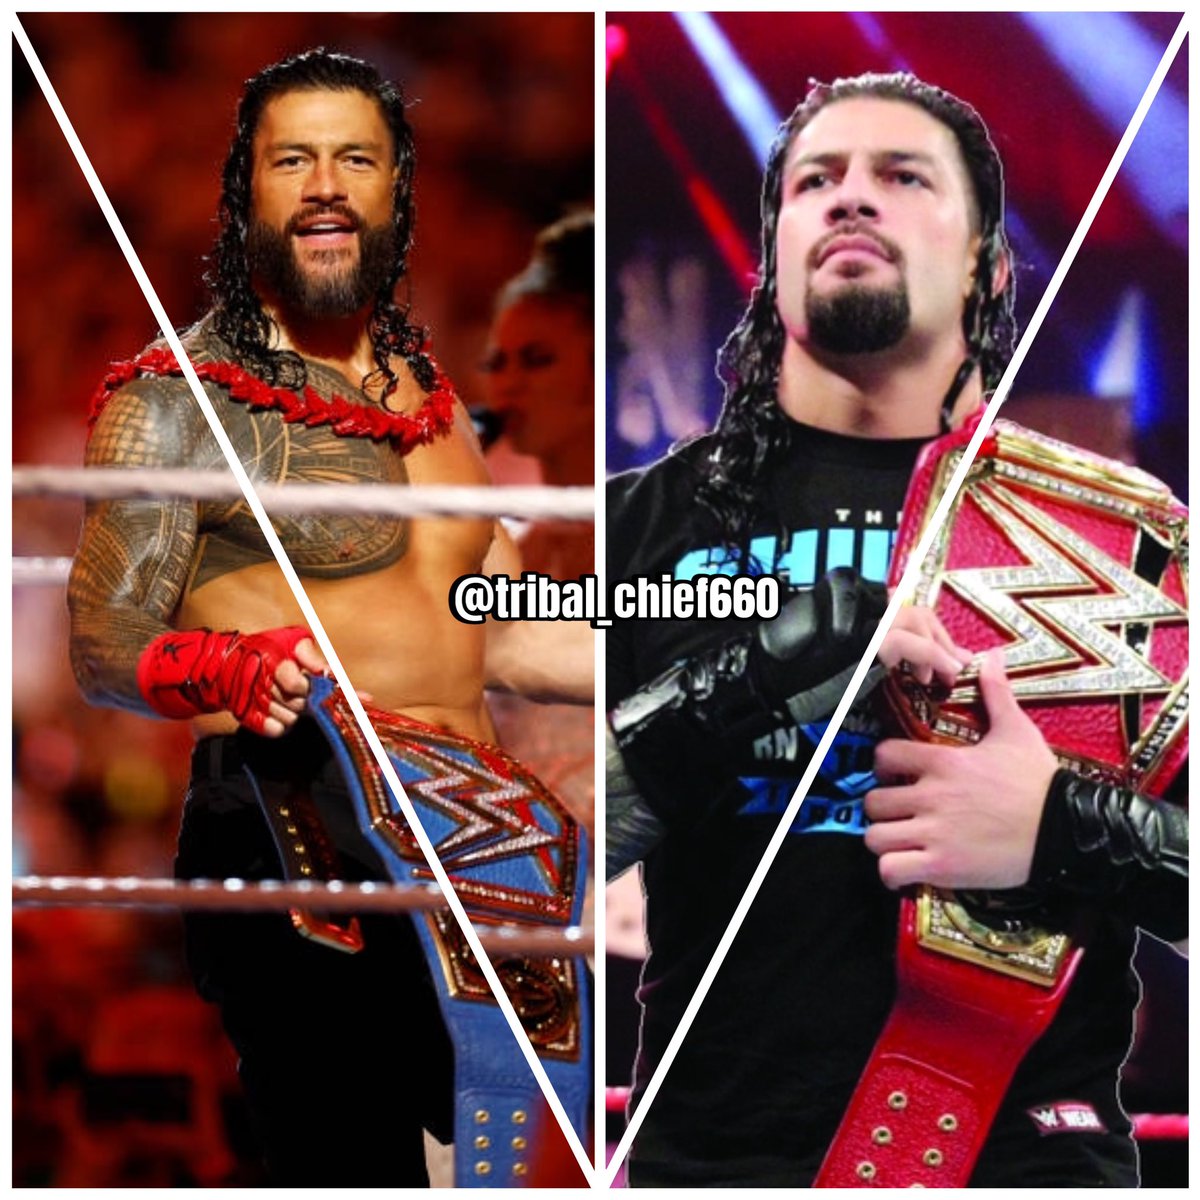 Which is better:
The tribal chief or the big dog? 🤴&🐶 
#RomanReigns #Tribalchief 
#Thebigdog #Theheadofthetable